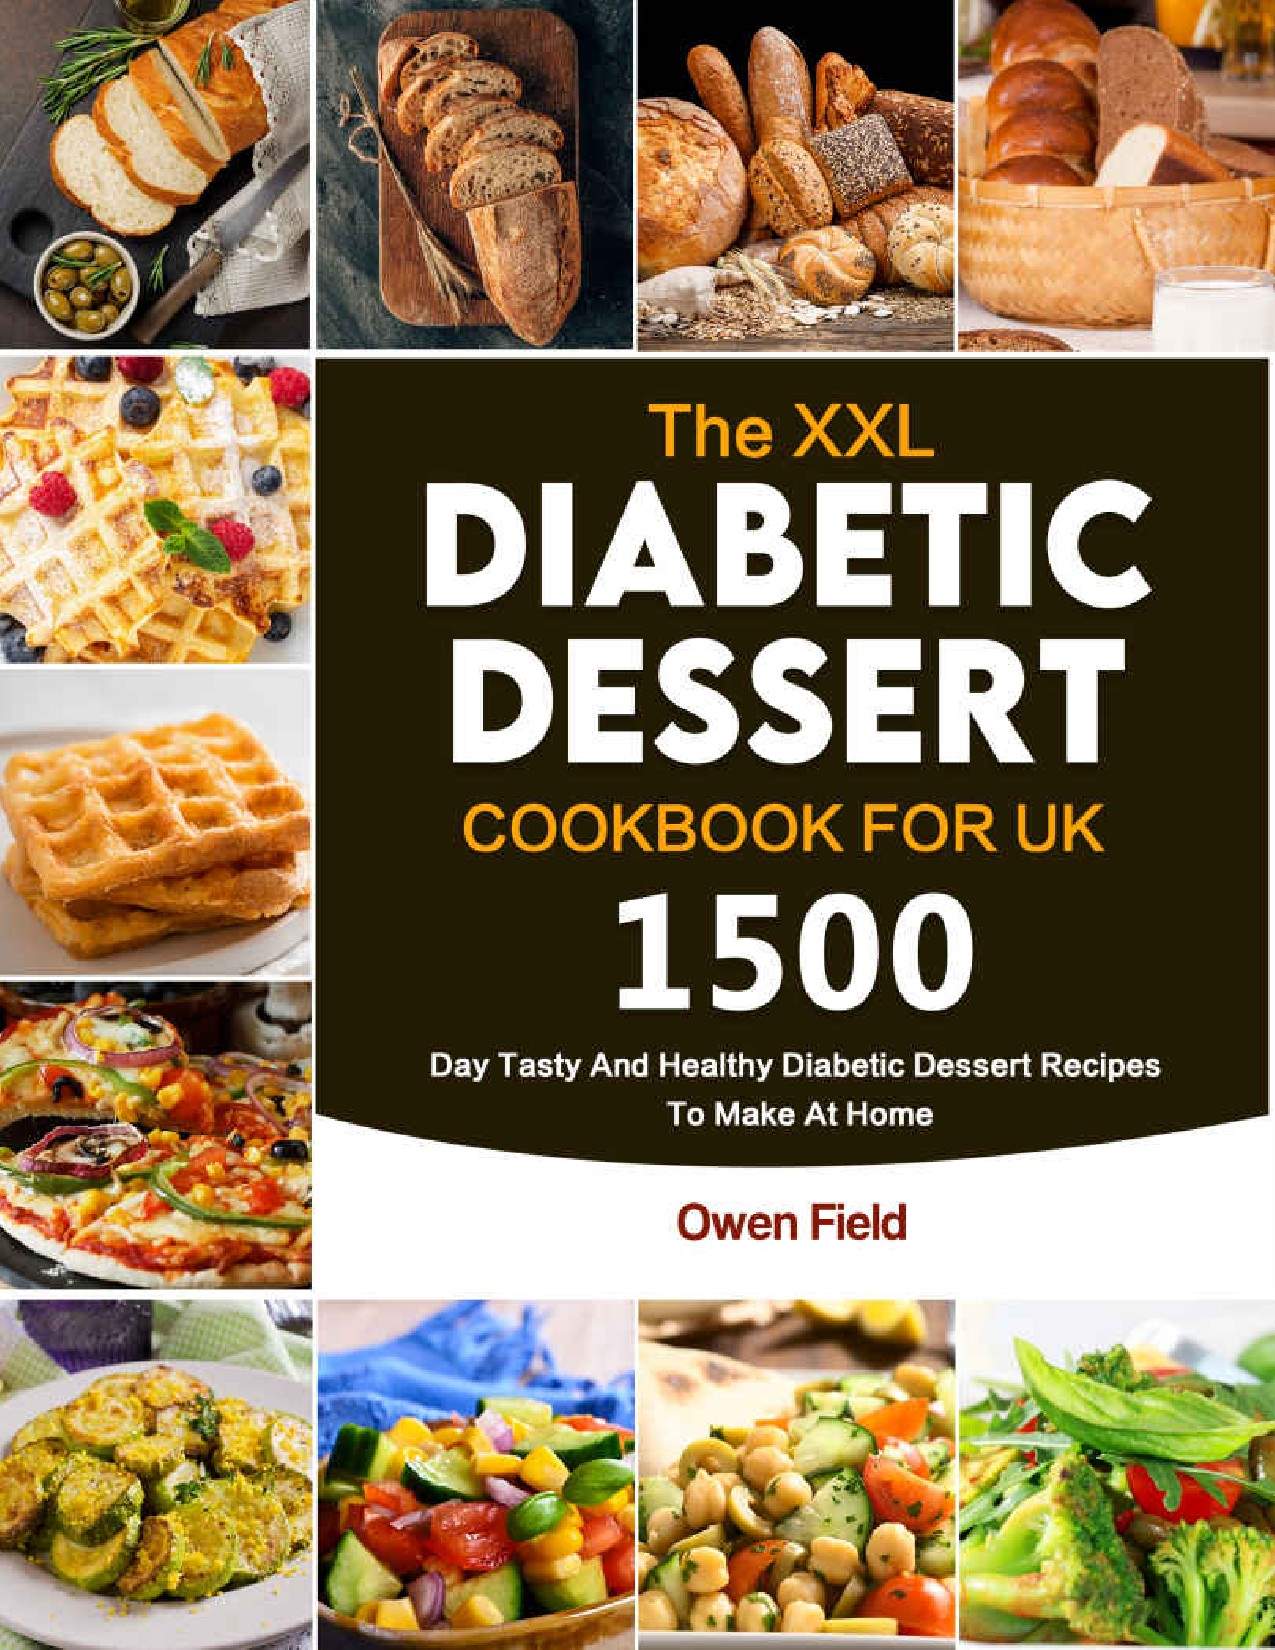 The Xxl Diabetic Dessert Cookbook 1500 Day Tasty And Healthy Diabetic Dessert Recipes To Make At Home